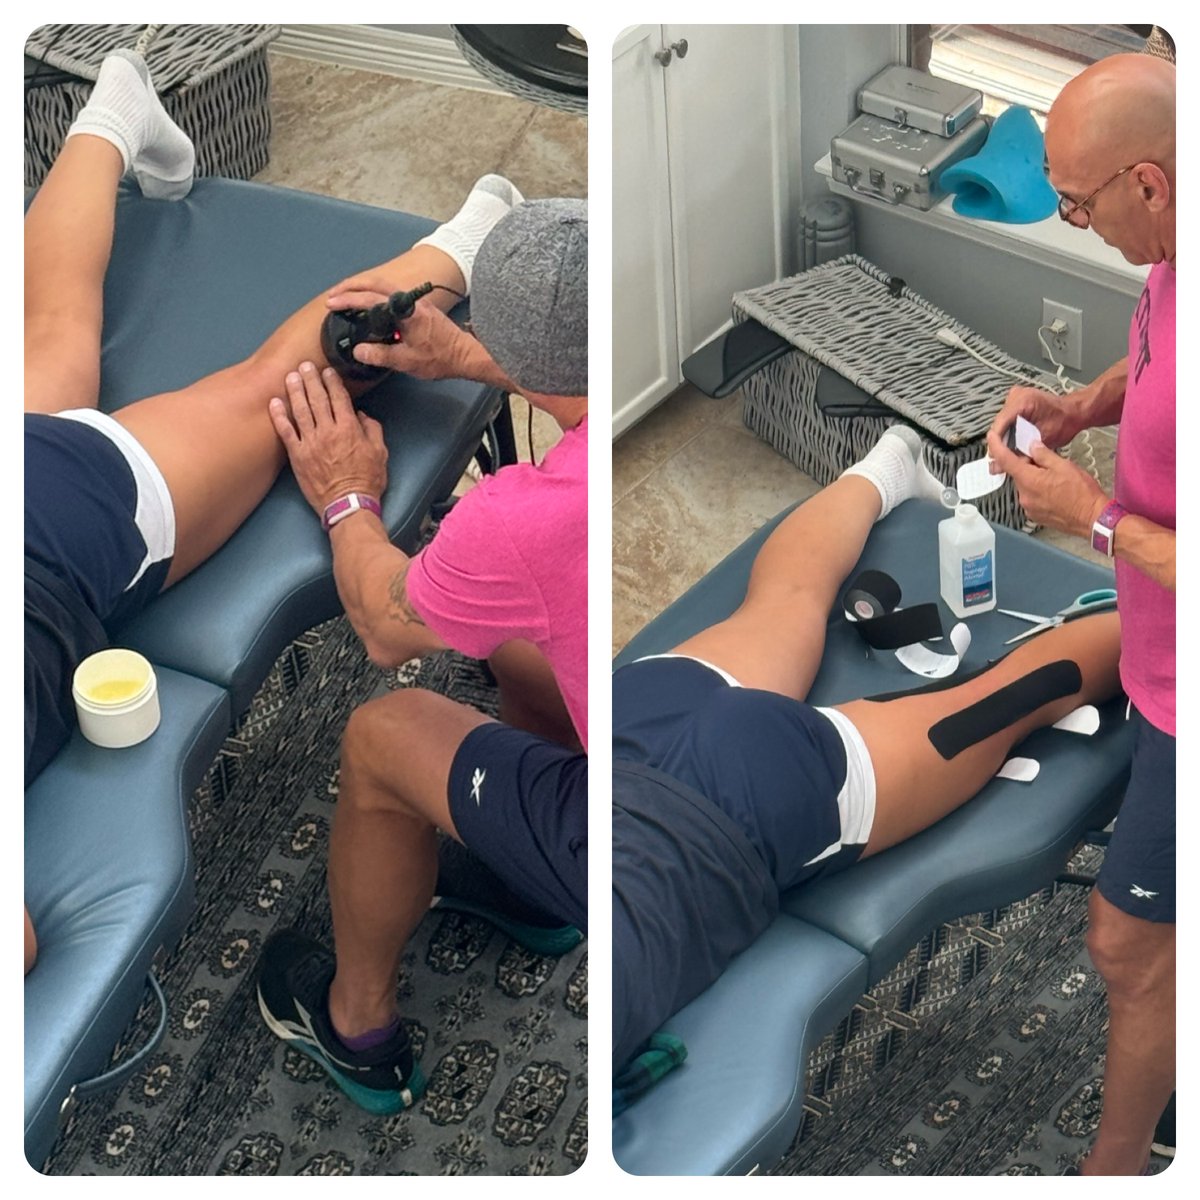 I play hard & I get banged up sometimes.  Luckily, my Dad helps athletes like me & I get spoiled with home therapy! I am so grateful for his help and he's a big reason why I'm focused on pursuing Health Science in College.  #soccer #sportstherapy  physiowellness.com